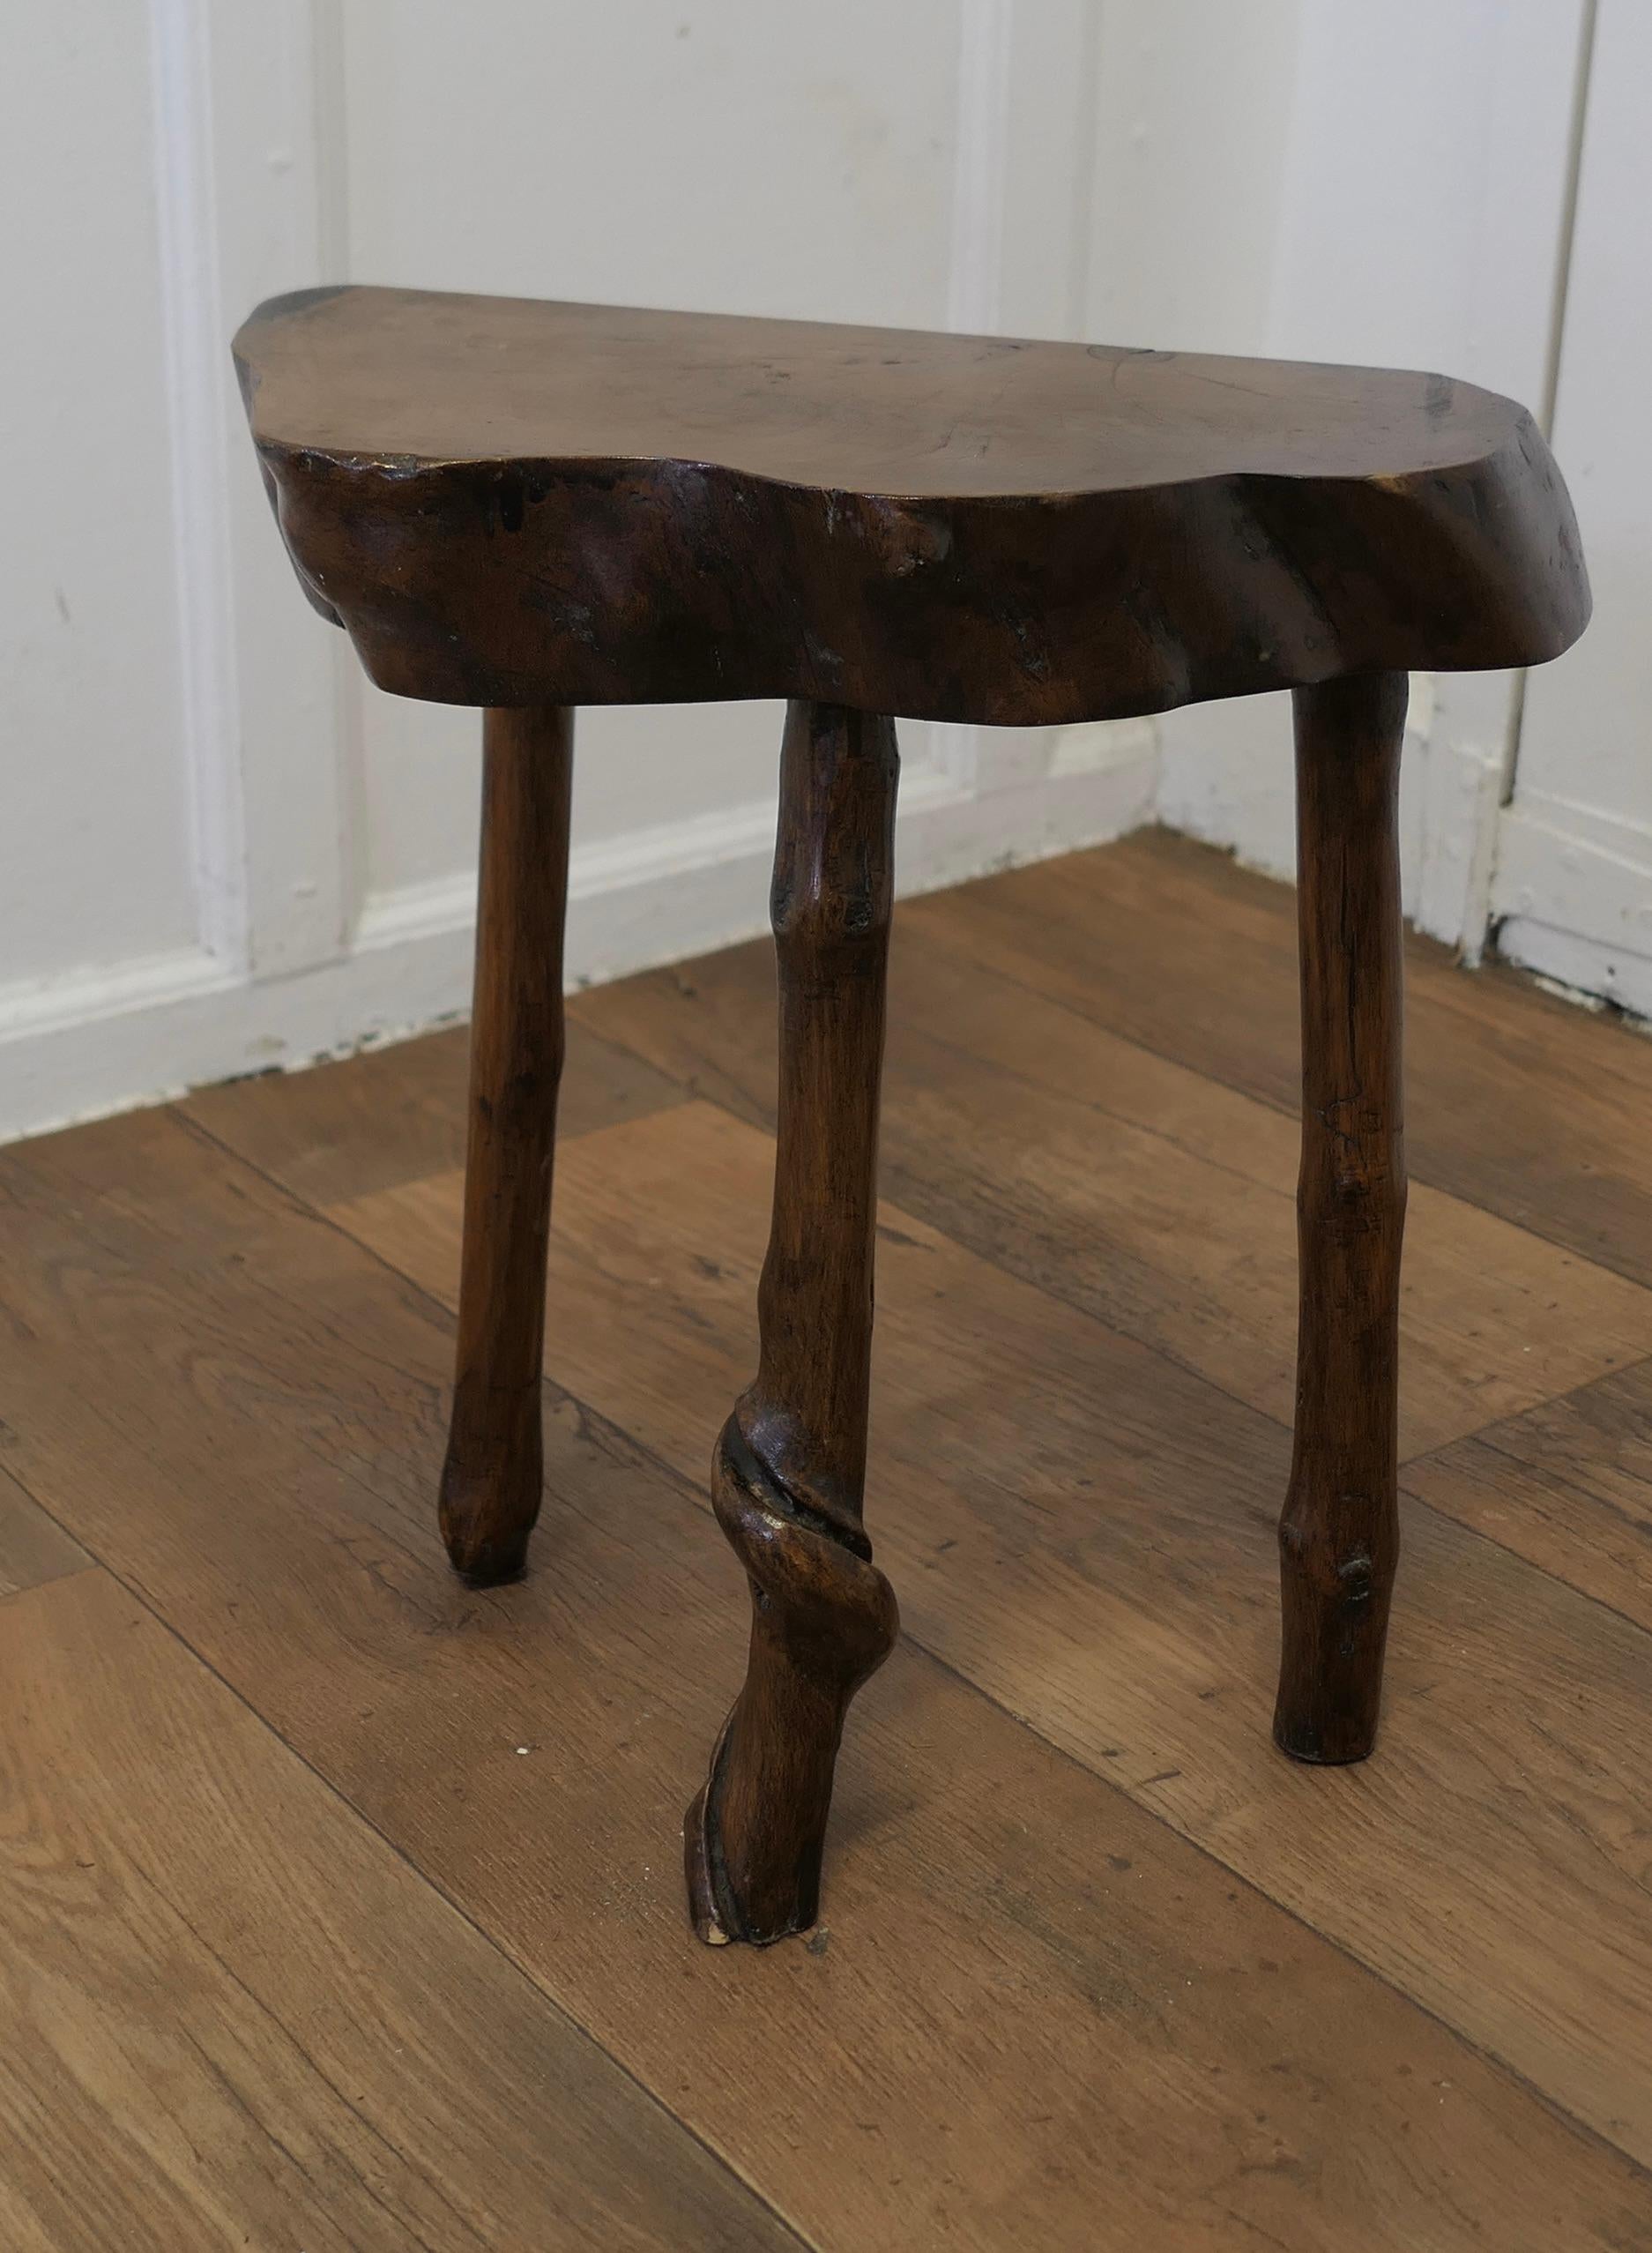 Solid Slice of Live Edge Elm Rustic Stool

A slice of elm cut from one piece of the Tree, flat with a live edge and uneven shape, the legs are made from twisted wood which formed by allowing vines to grow around the wood while it is growing 
 
The